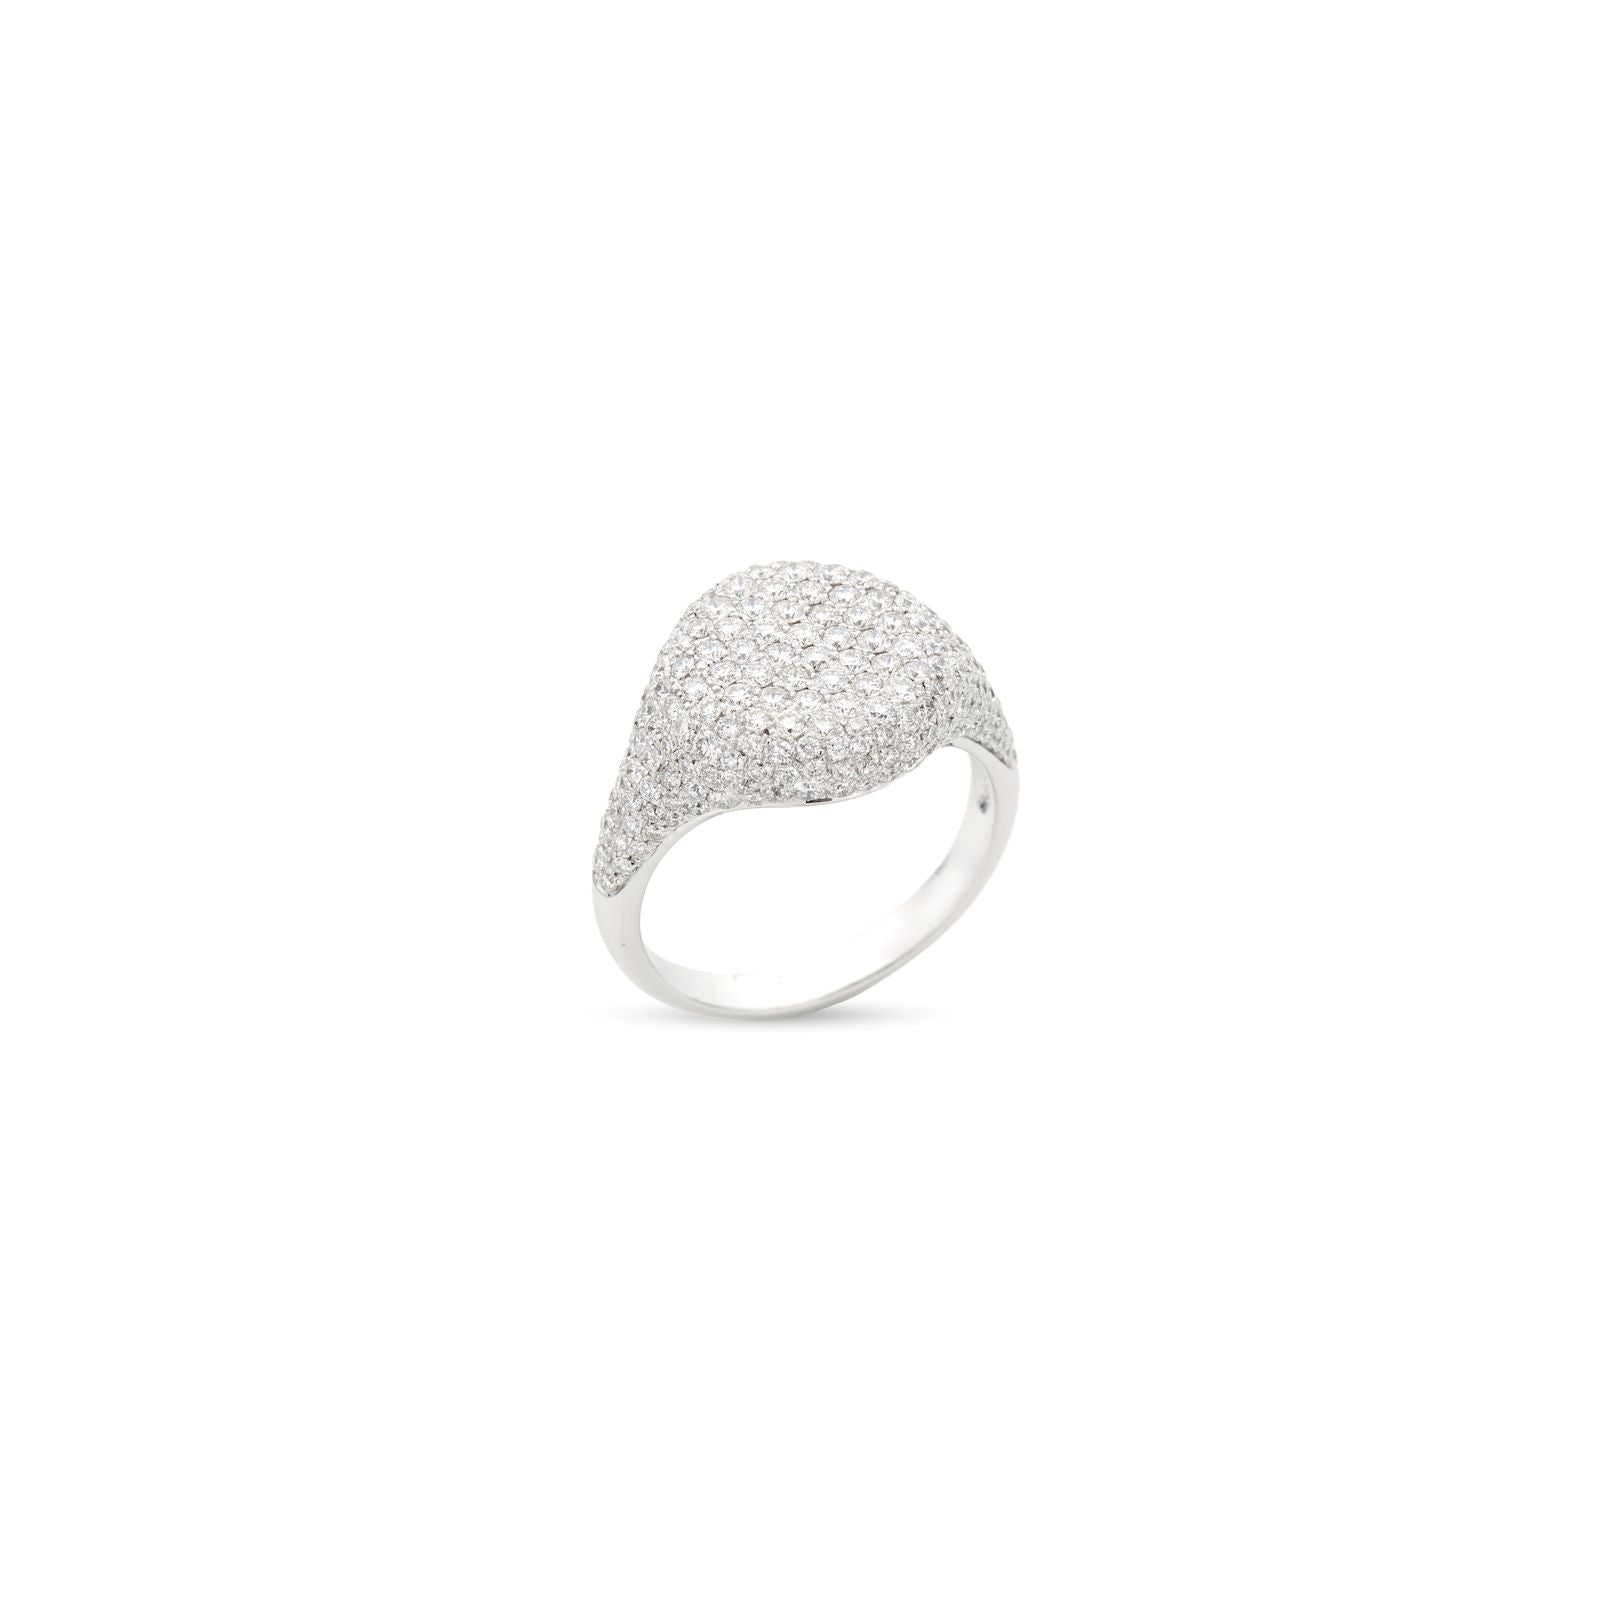 White gold and diamond ring - 505A01DW